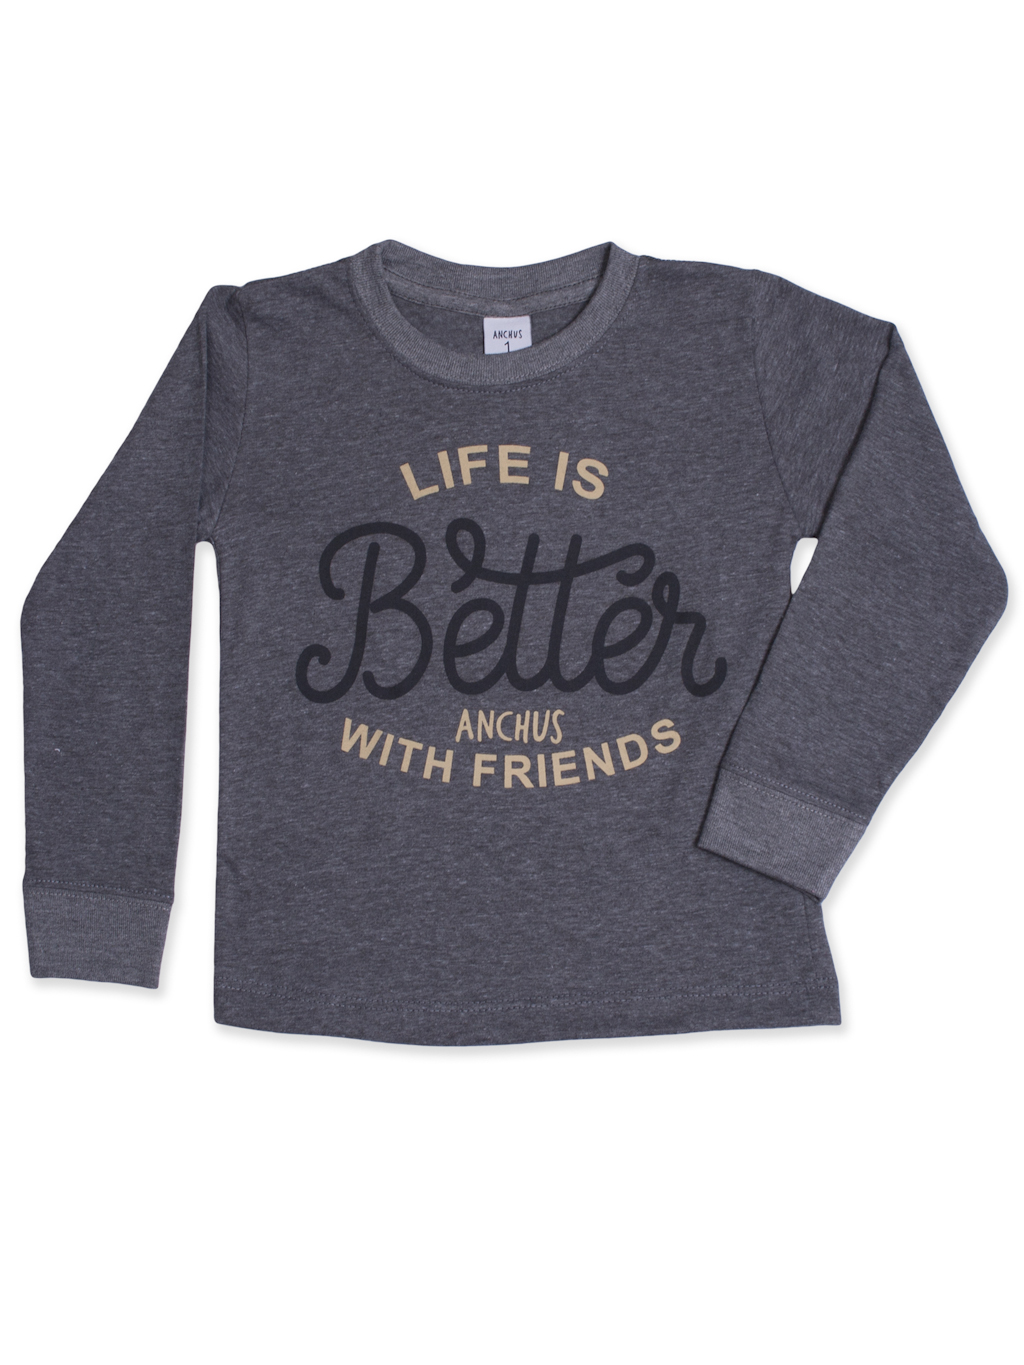 Remera ml Better with friends